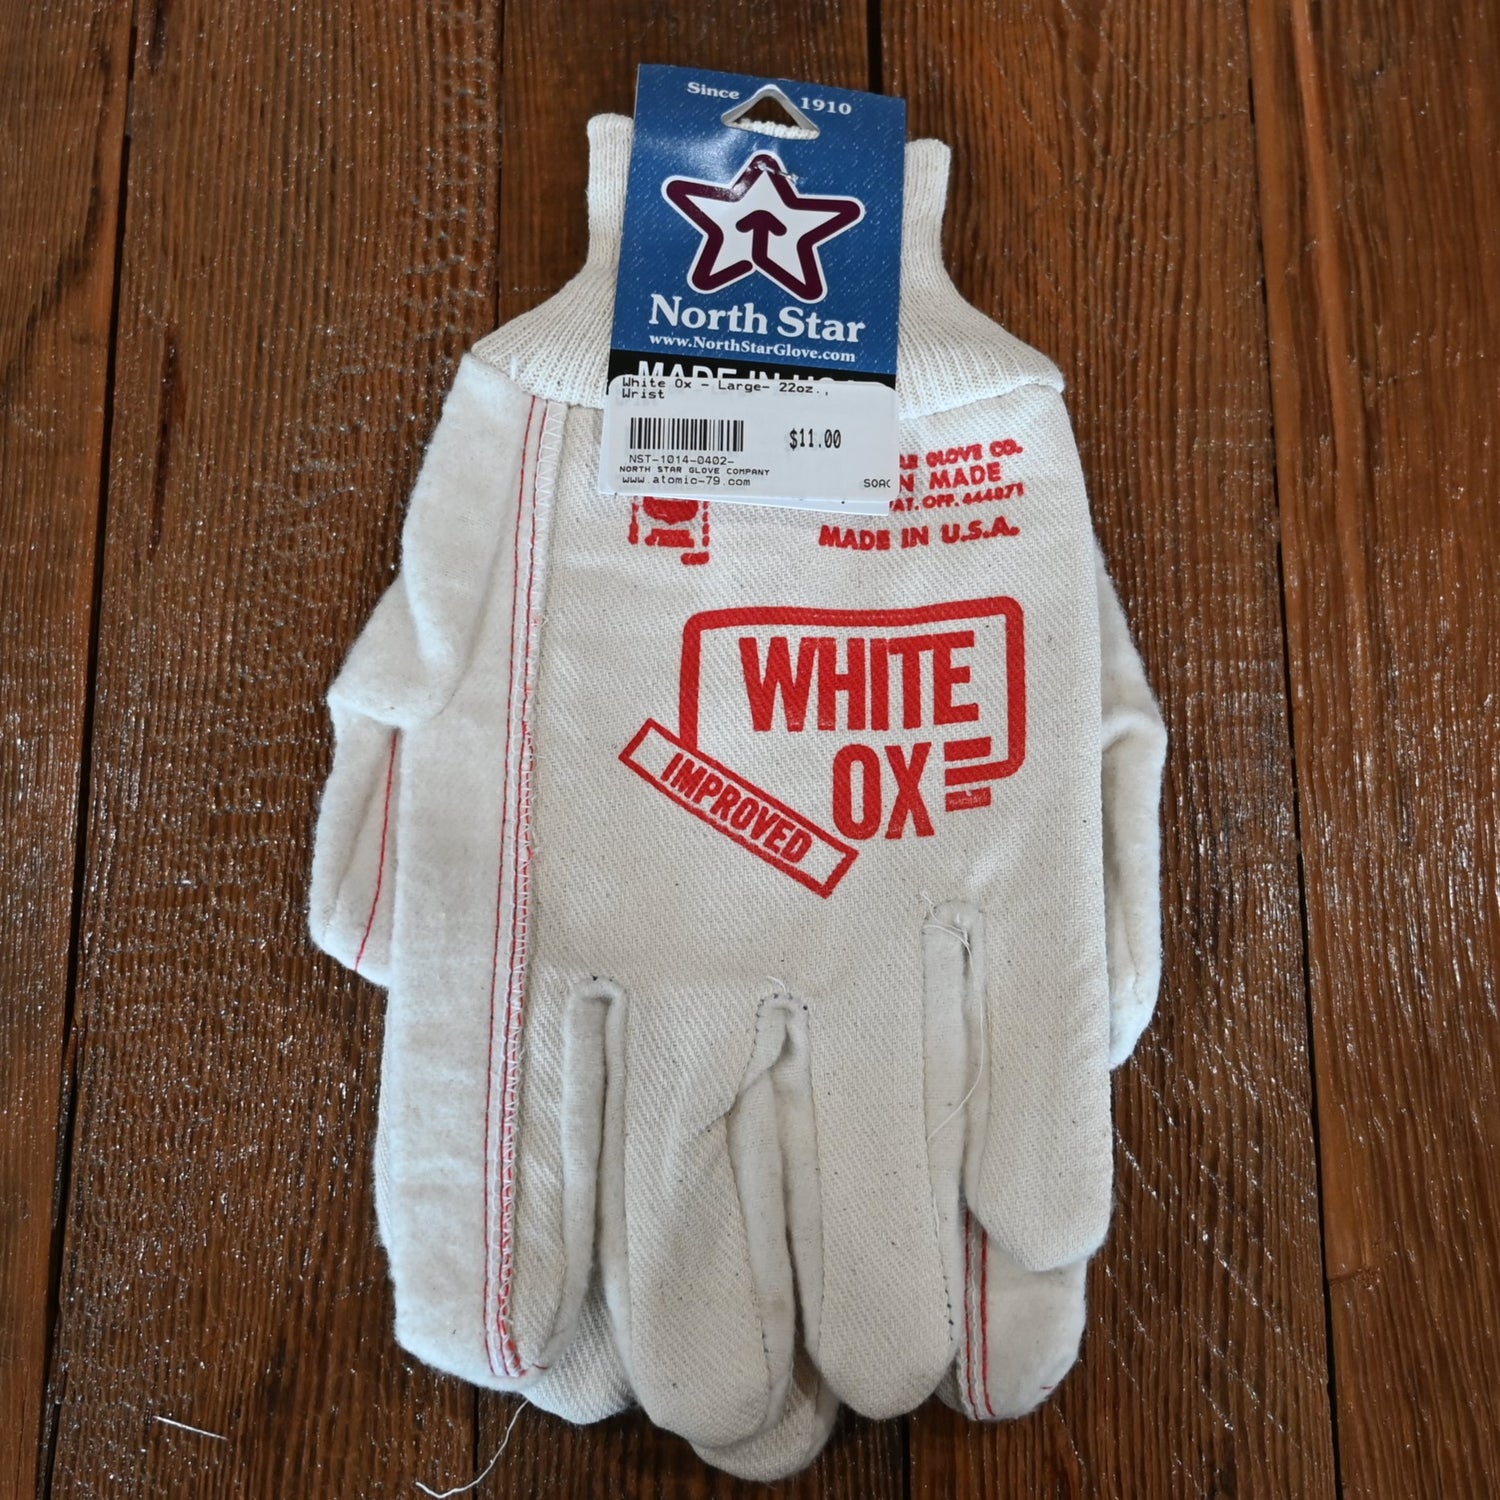 White Ox - Large- 22oz., Wrist view of front